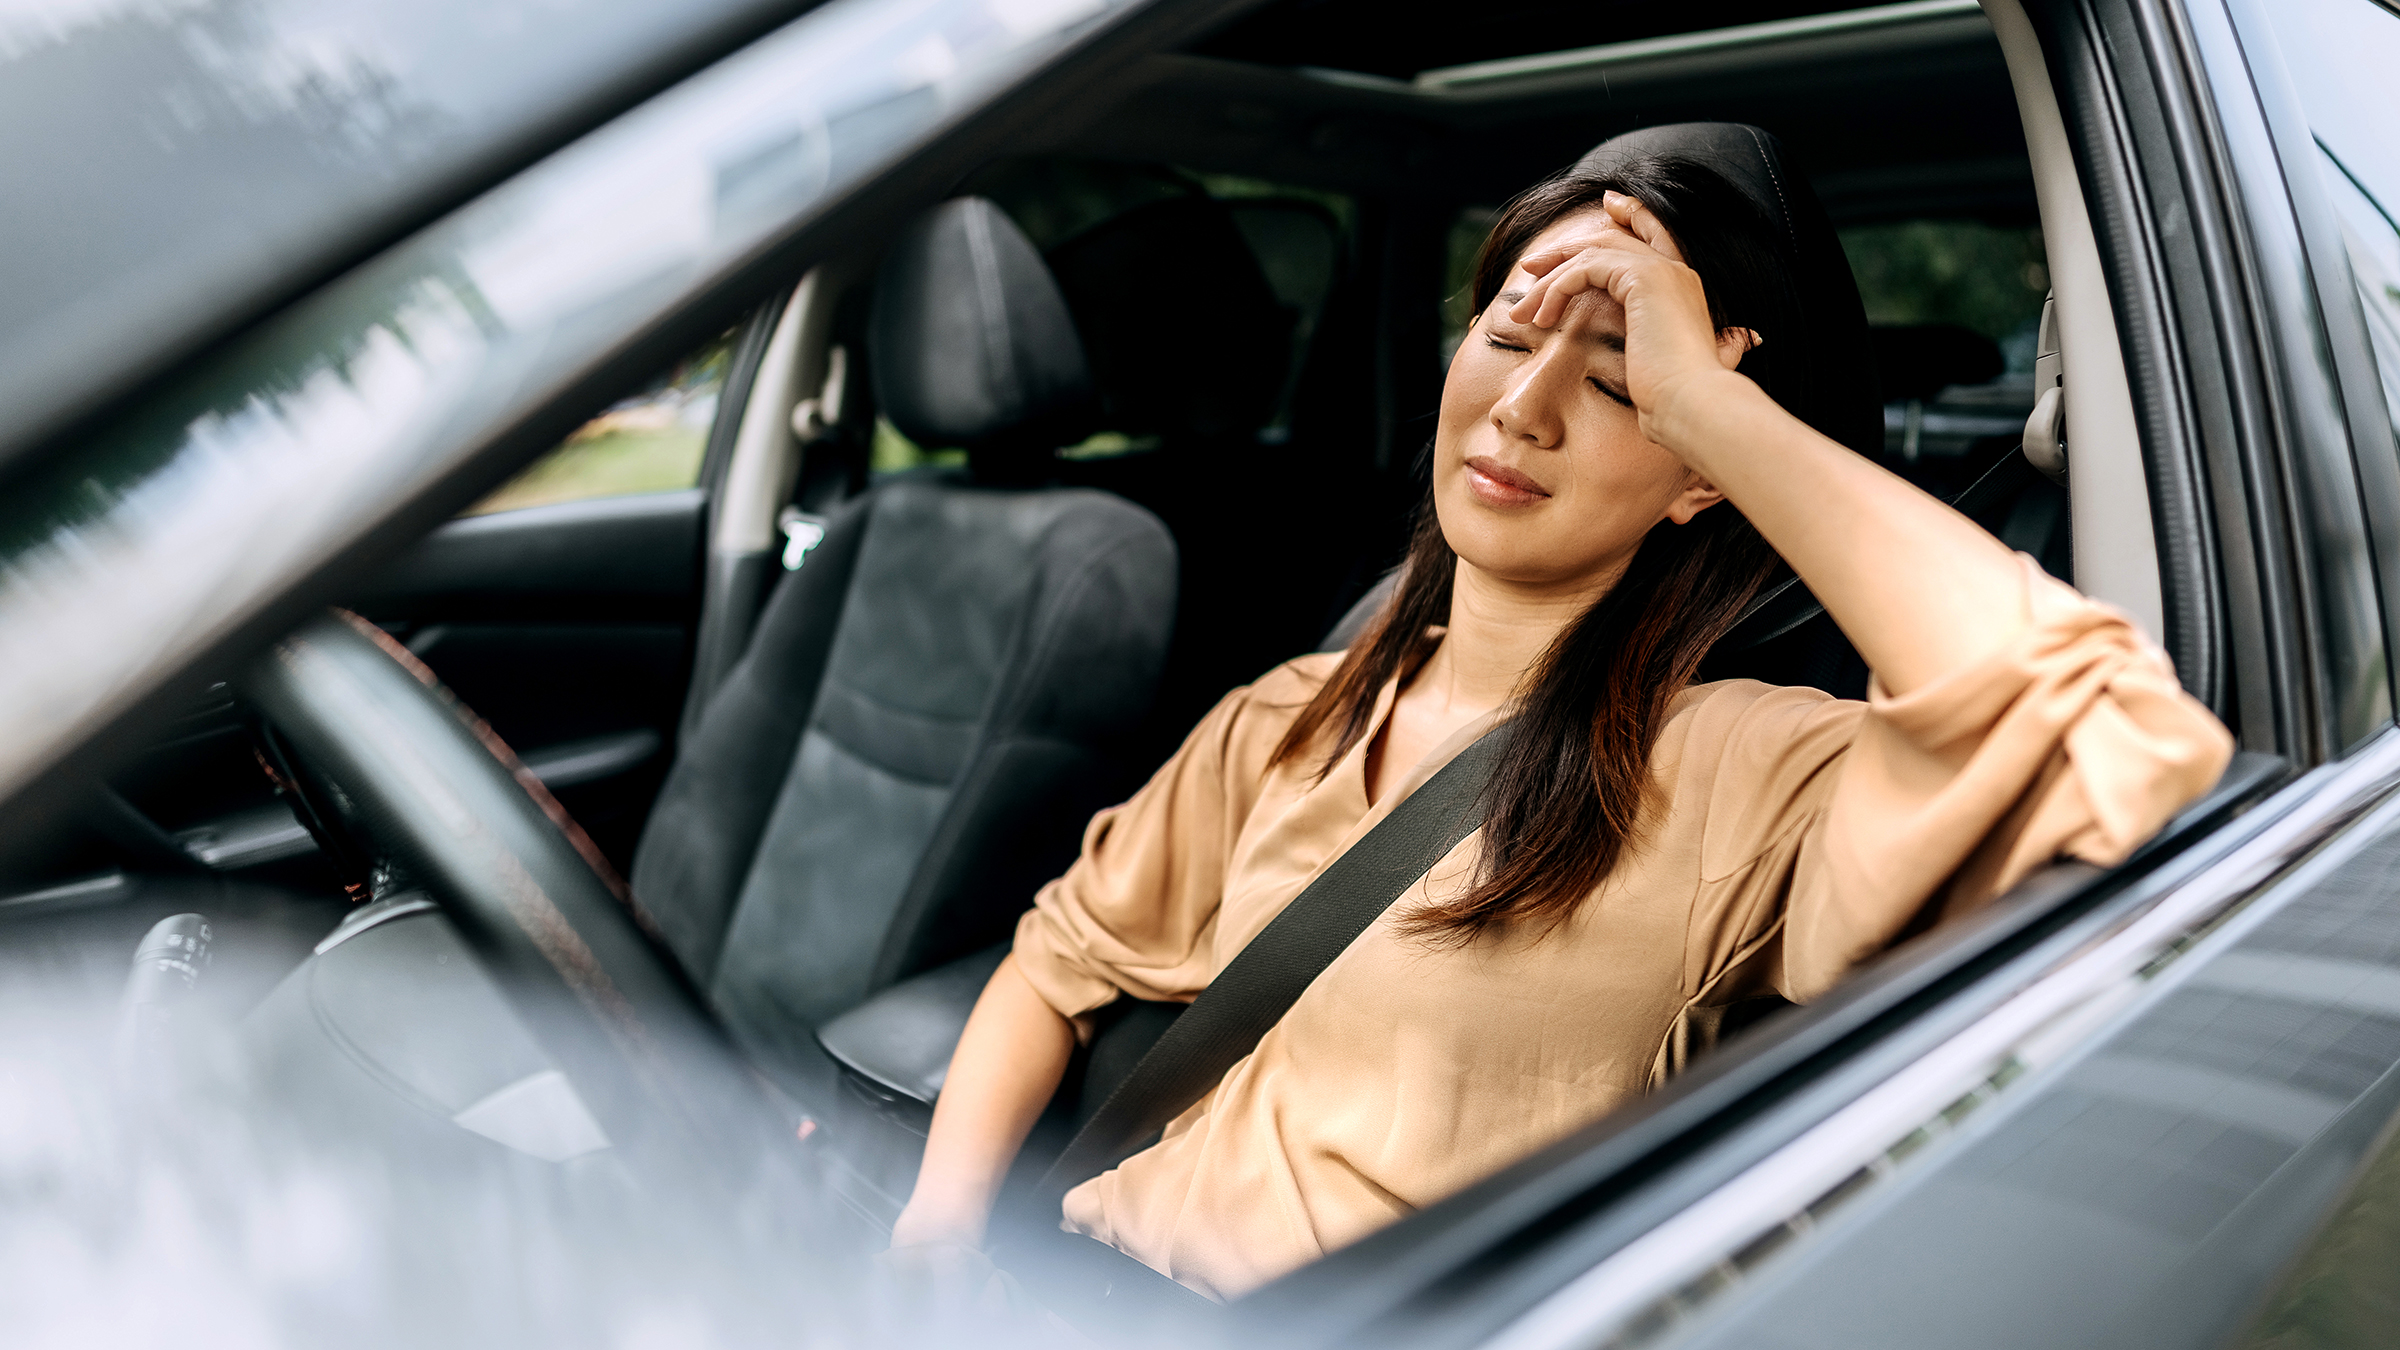 Mental Health: woman upset in drivers seat 1663262600